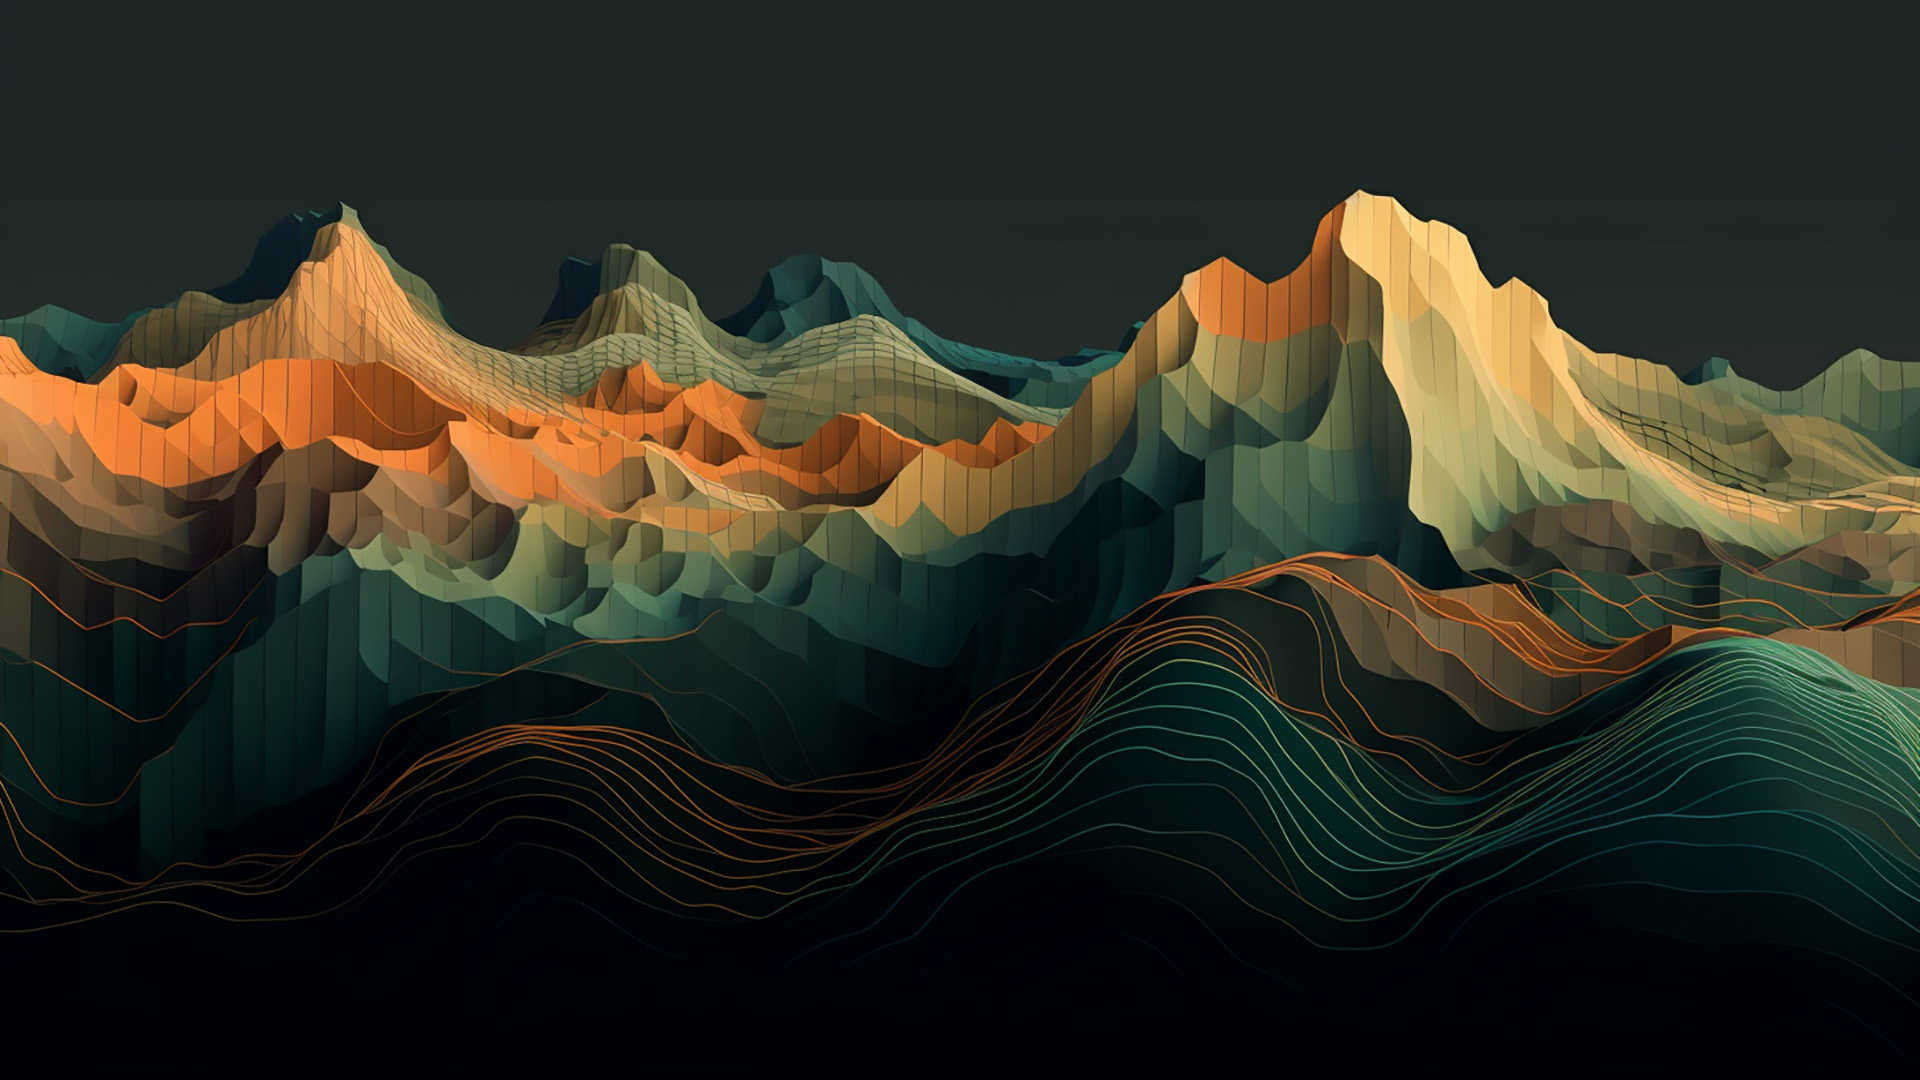 A landscape with hills and valleys, representing the terrain of data one navigates using SQL